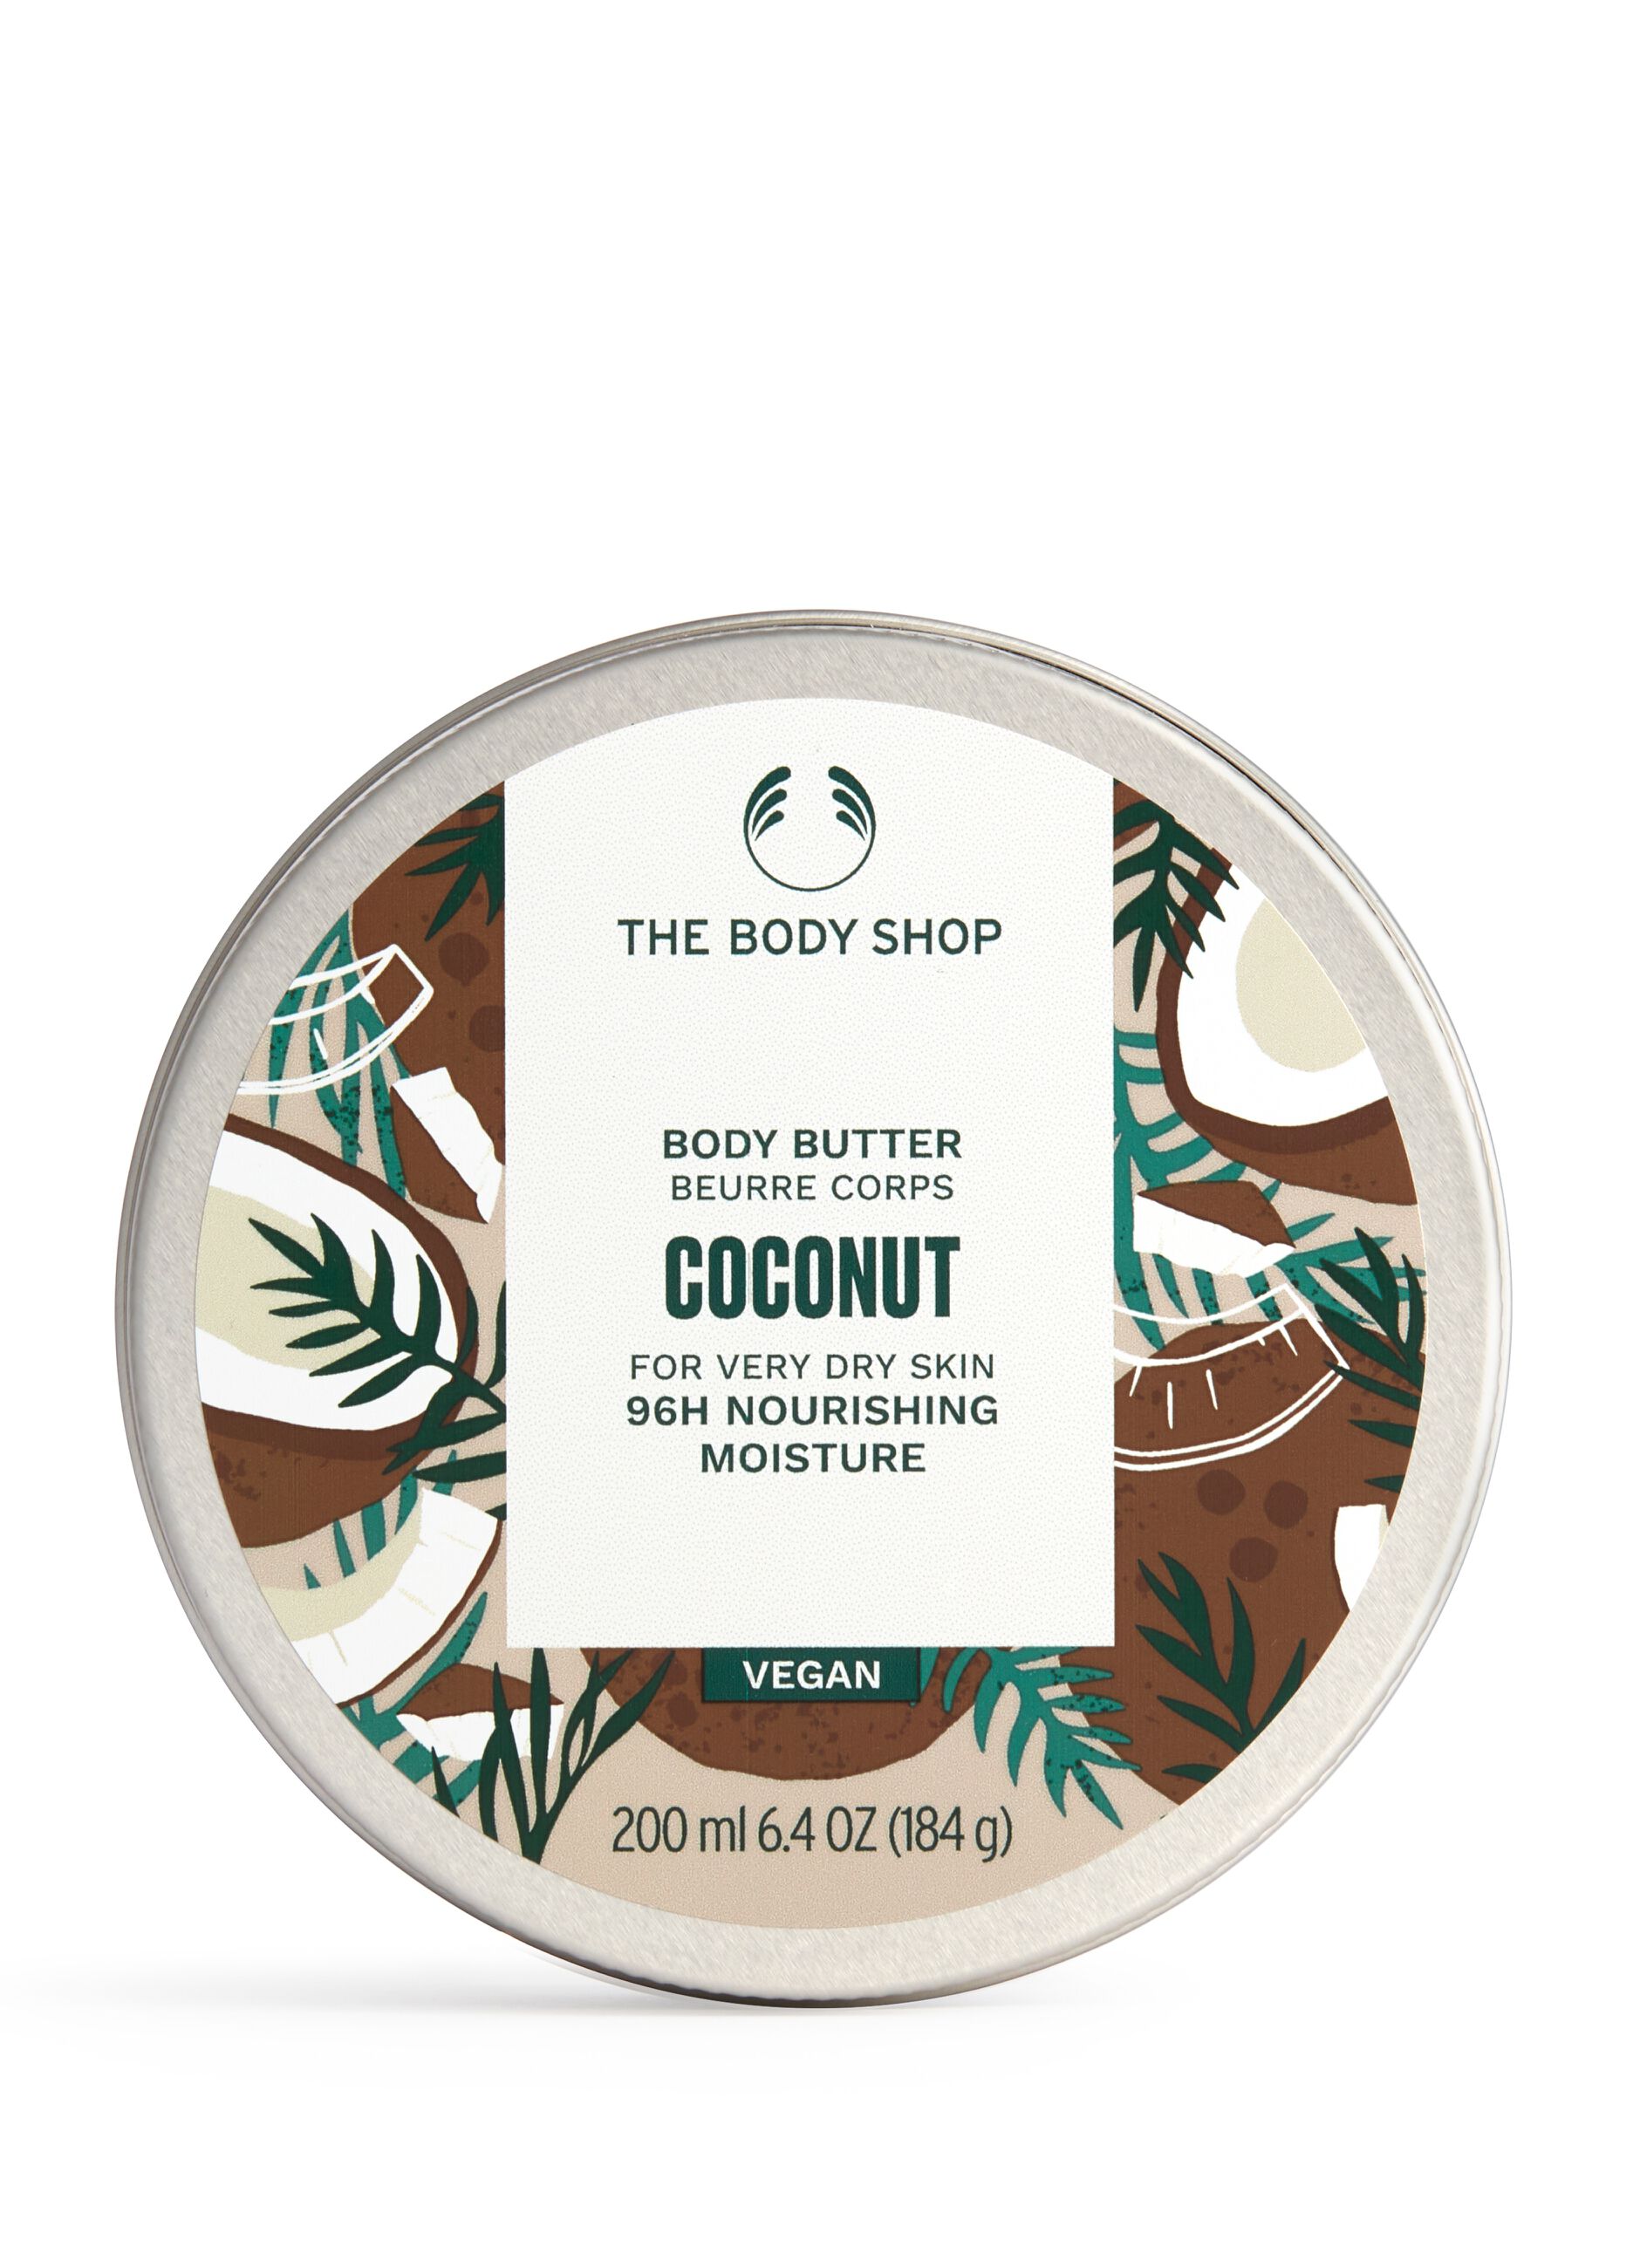 The Body Shop coconut body butter 200ml